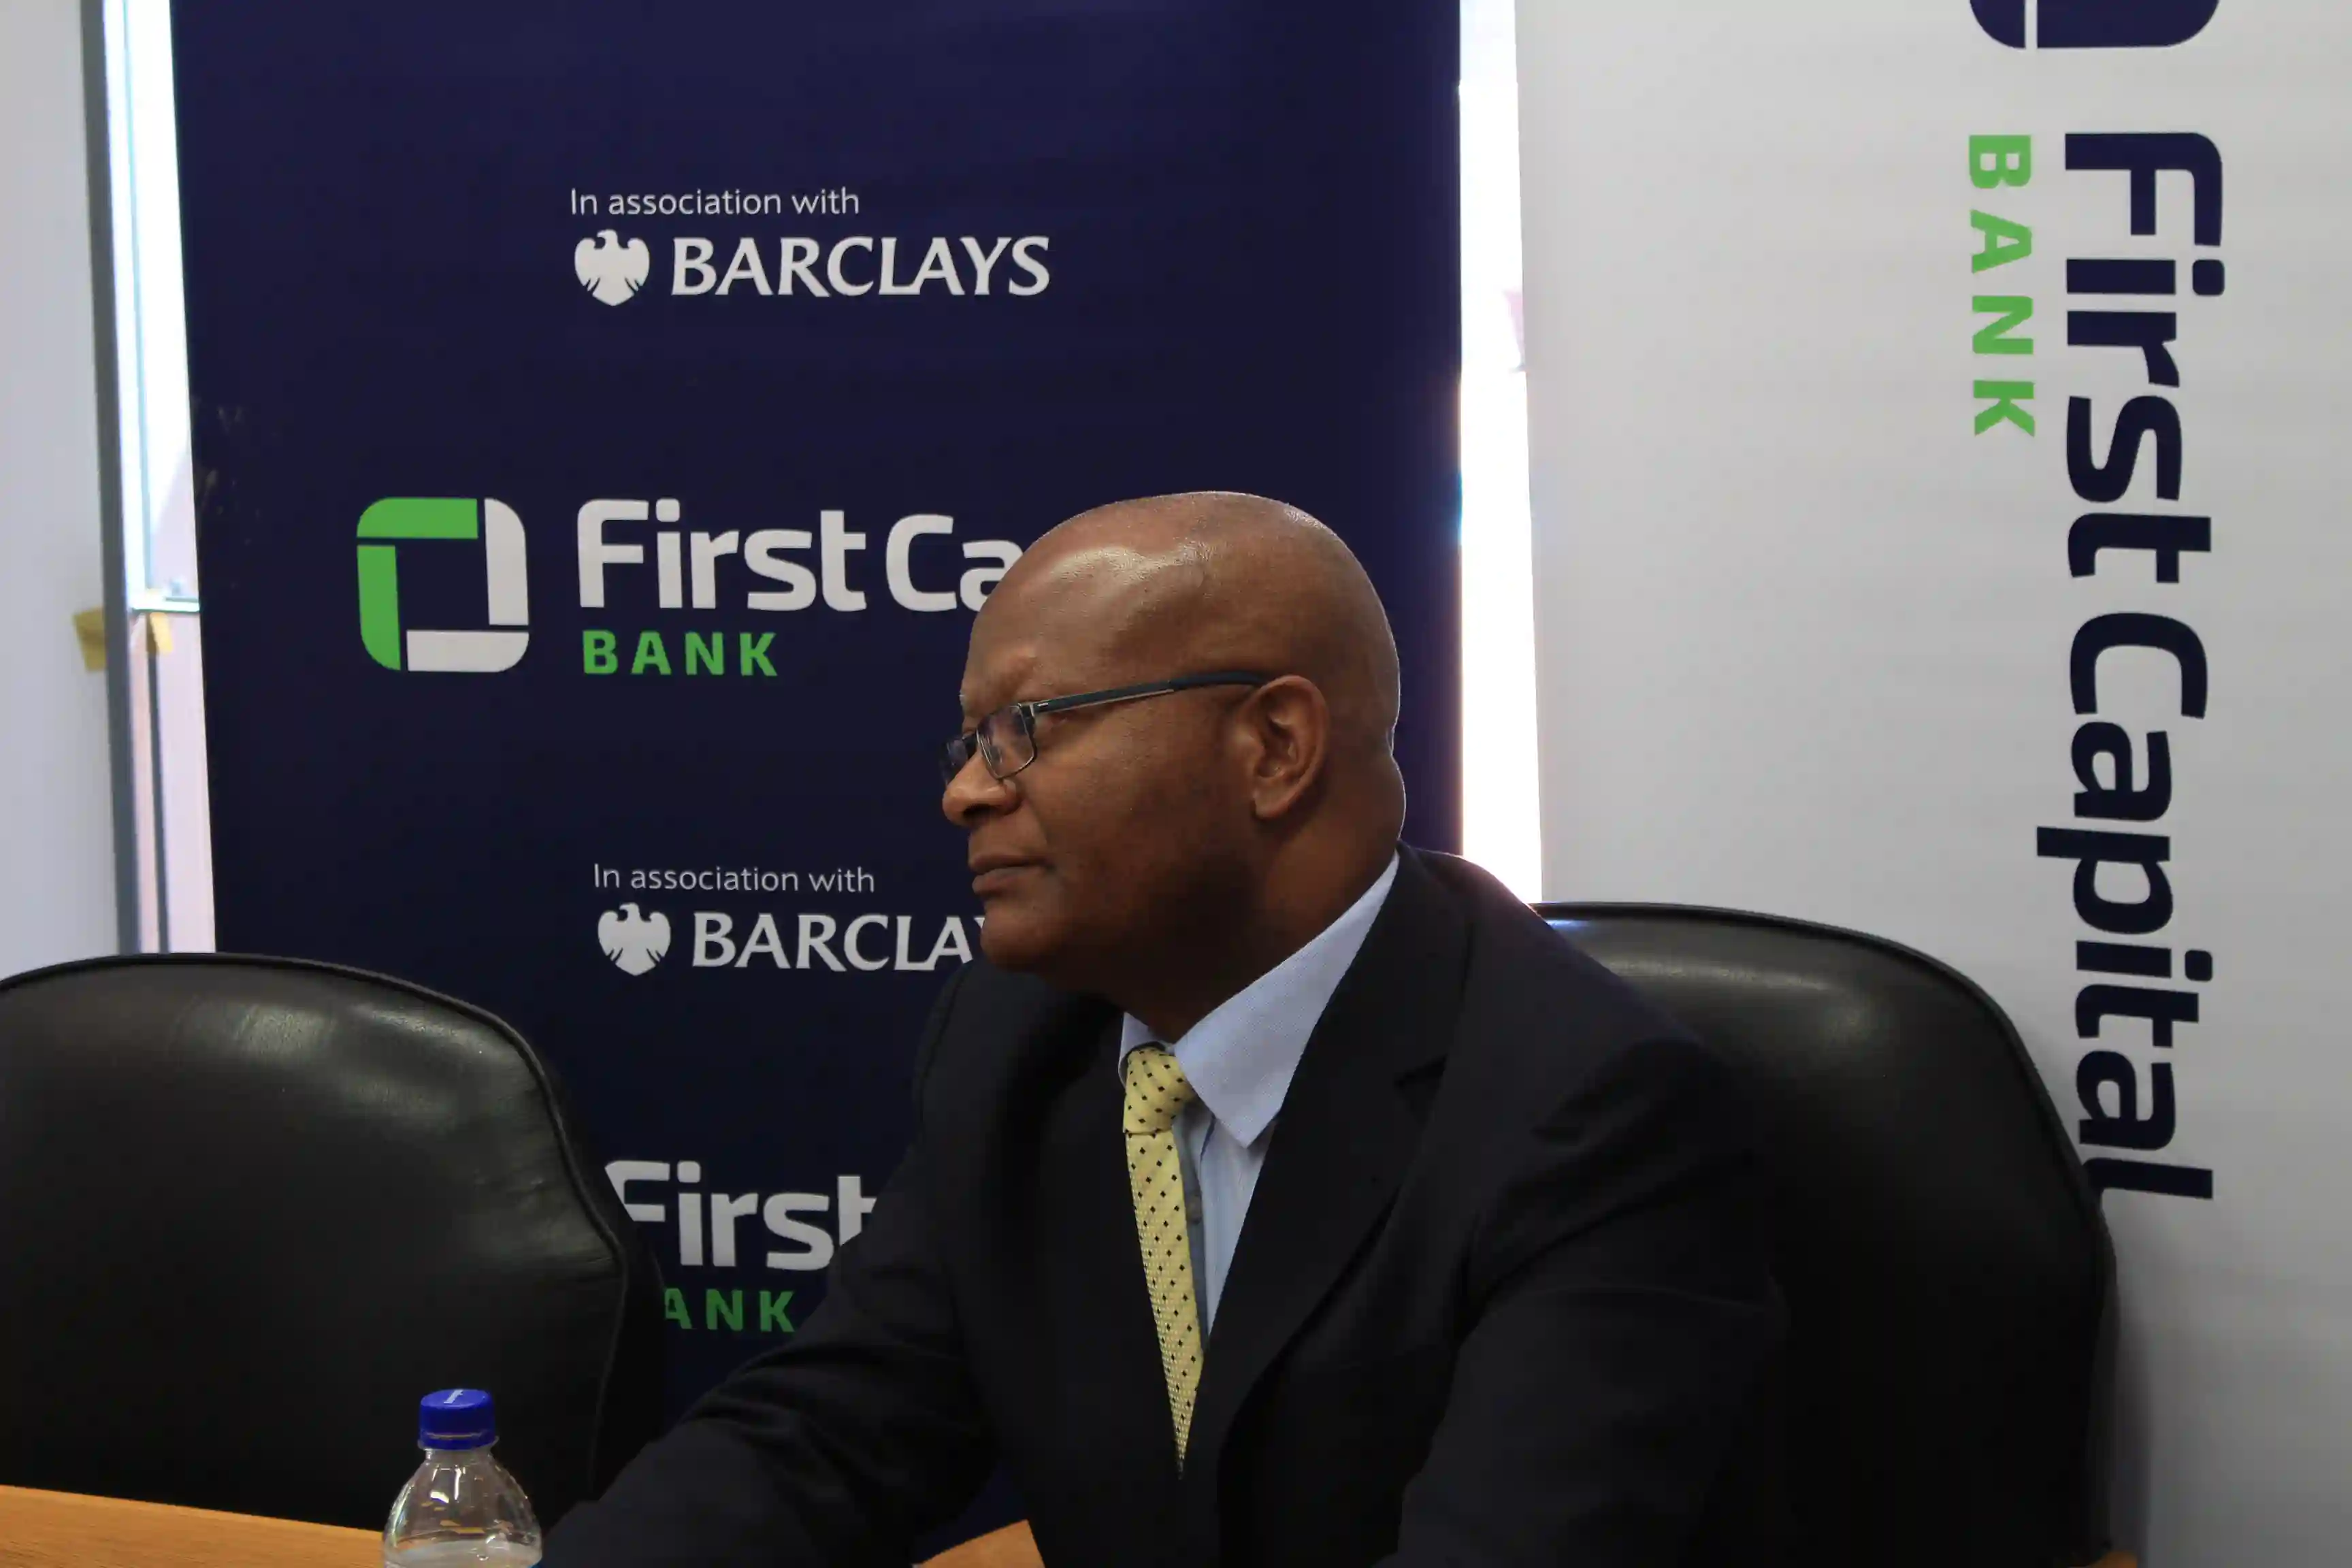 200+ First Capital Bank Employees To Be Retrenched